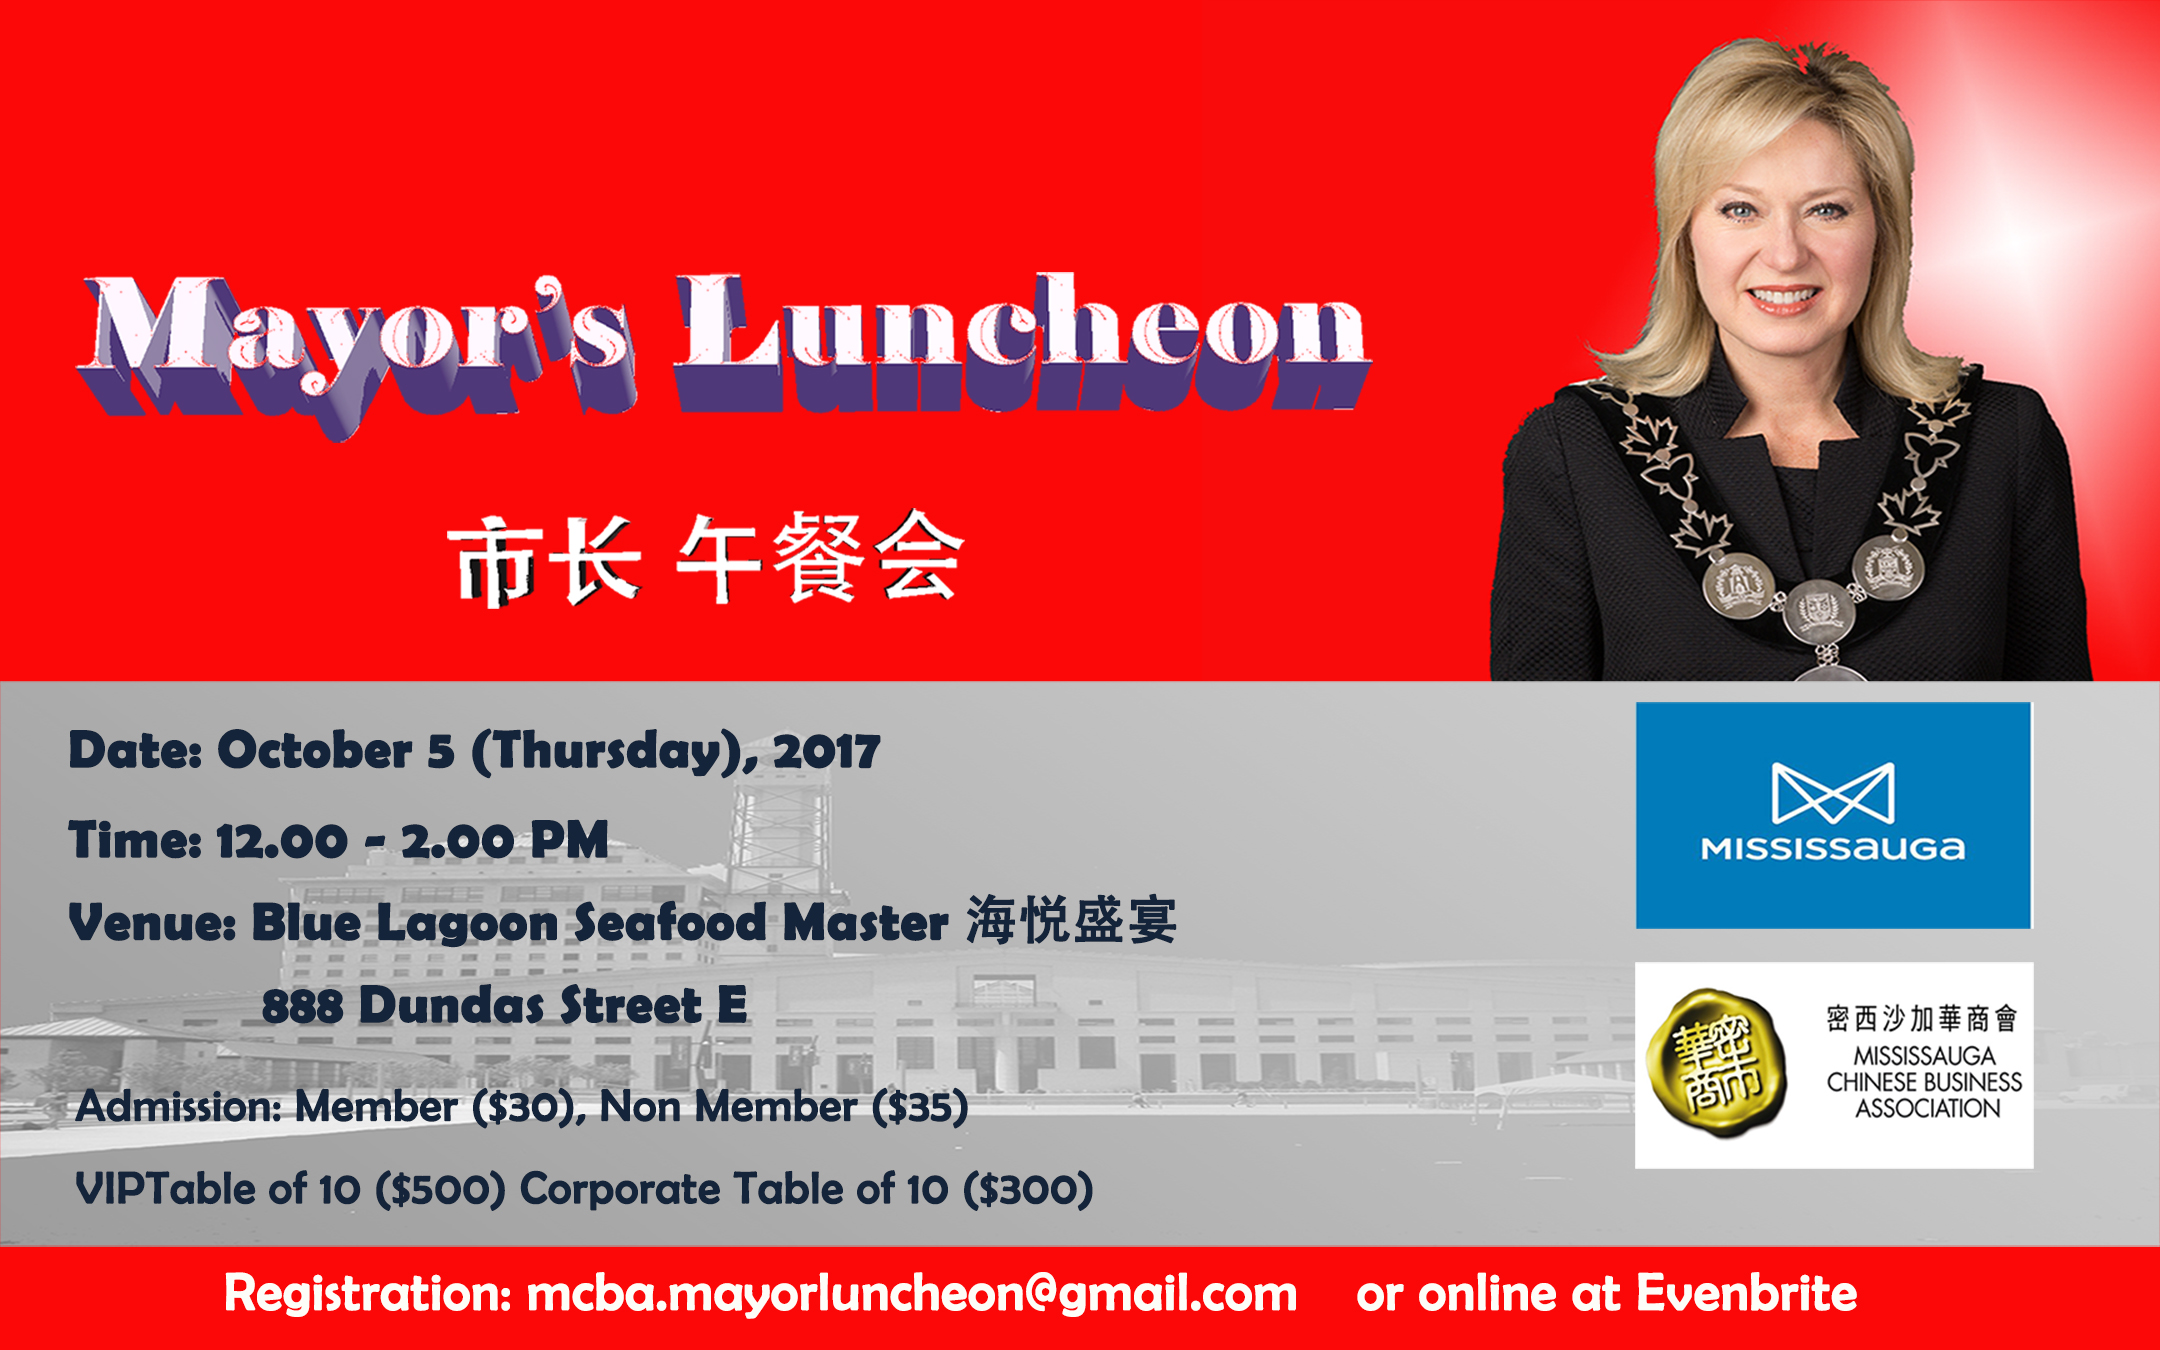 Mississauga Mayor Bonnie Crombie Luncheon image from Pierre Wong email 12 Sep 2017